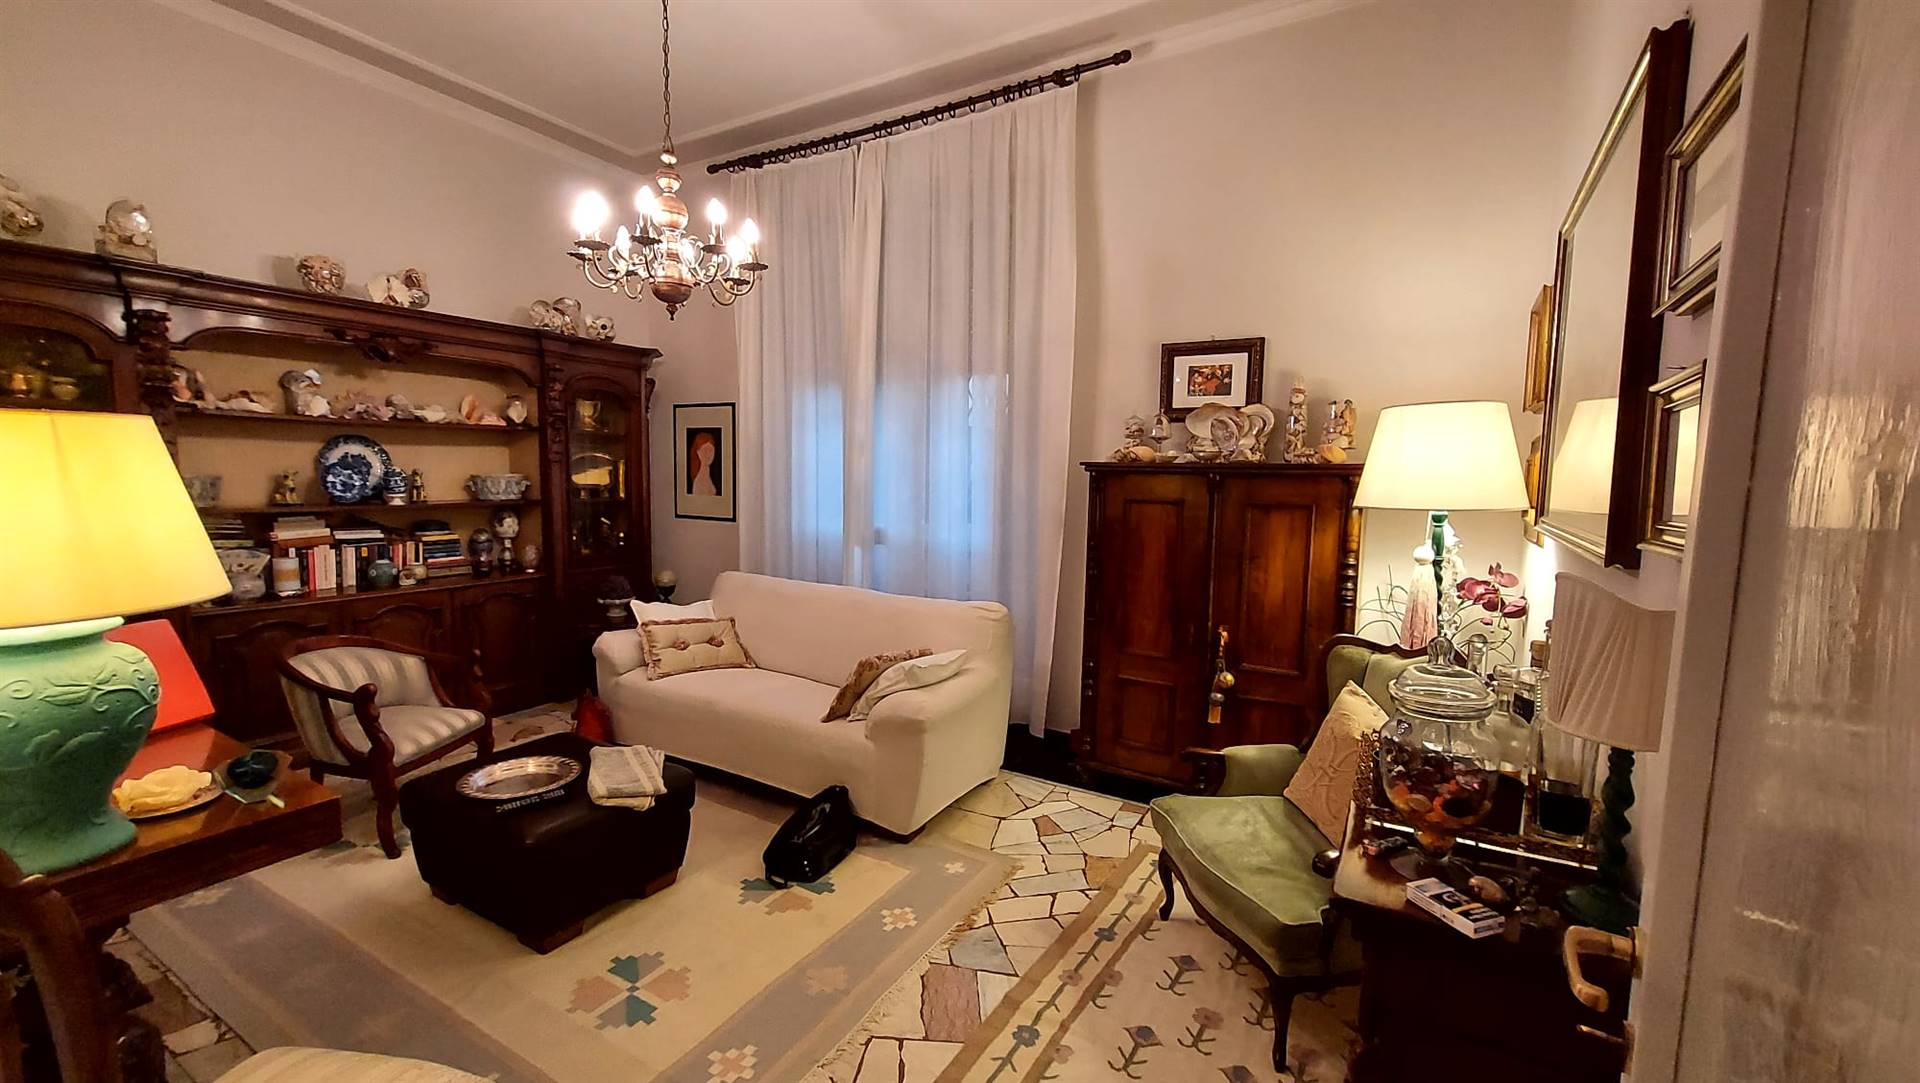 CAMPO DI MARTE, FIRENZE, Apartment for sale of 155 Sq. mt., Good condition, Heating Individual heating system, Energetic class: G, Epi: 230 kwh/m2 